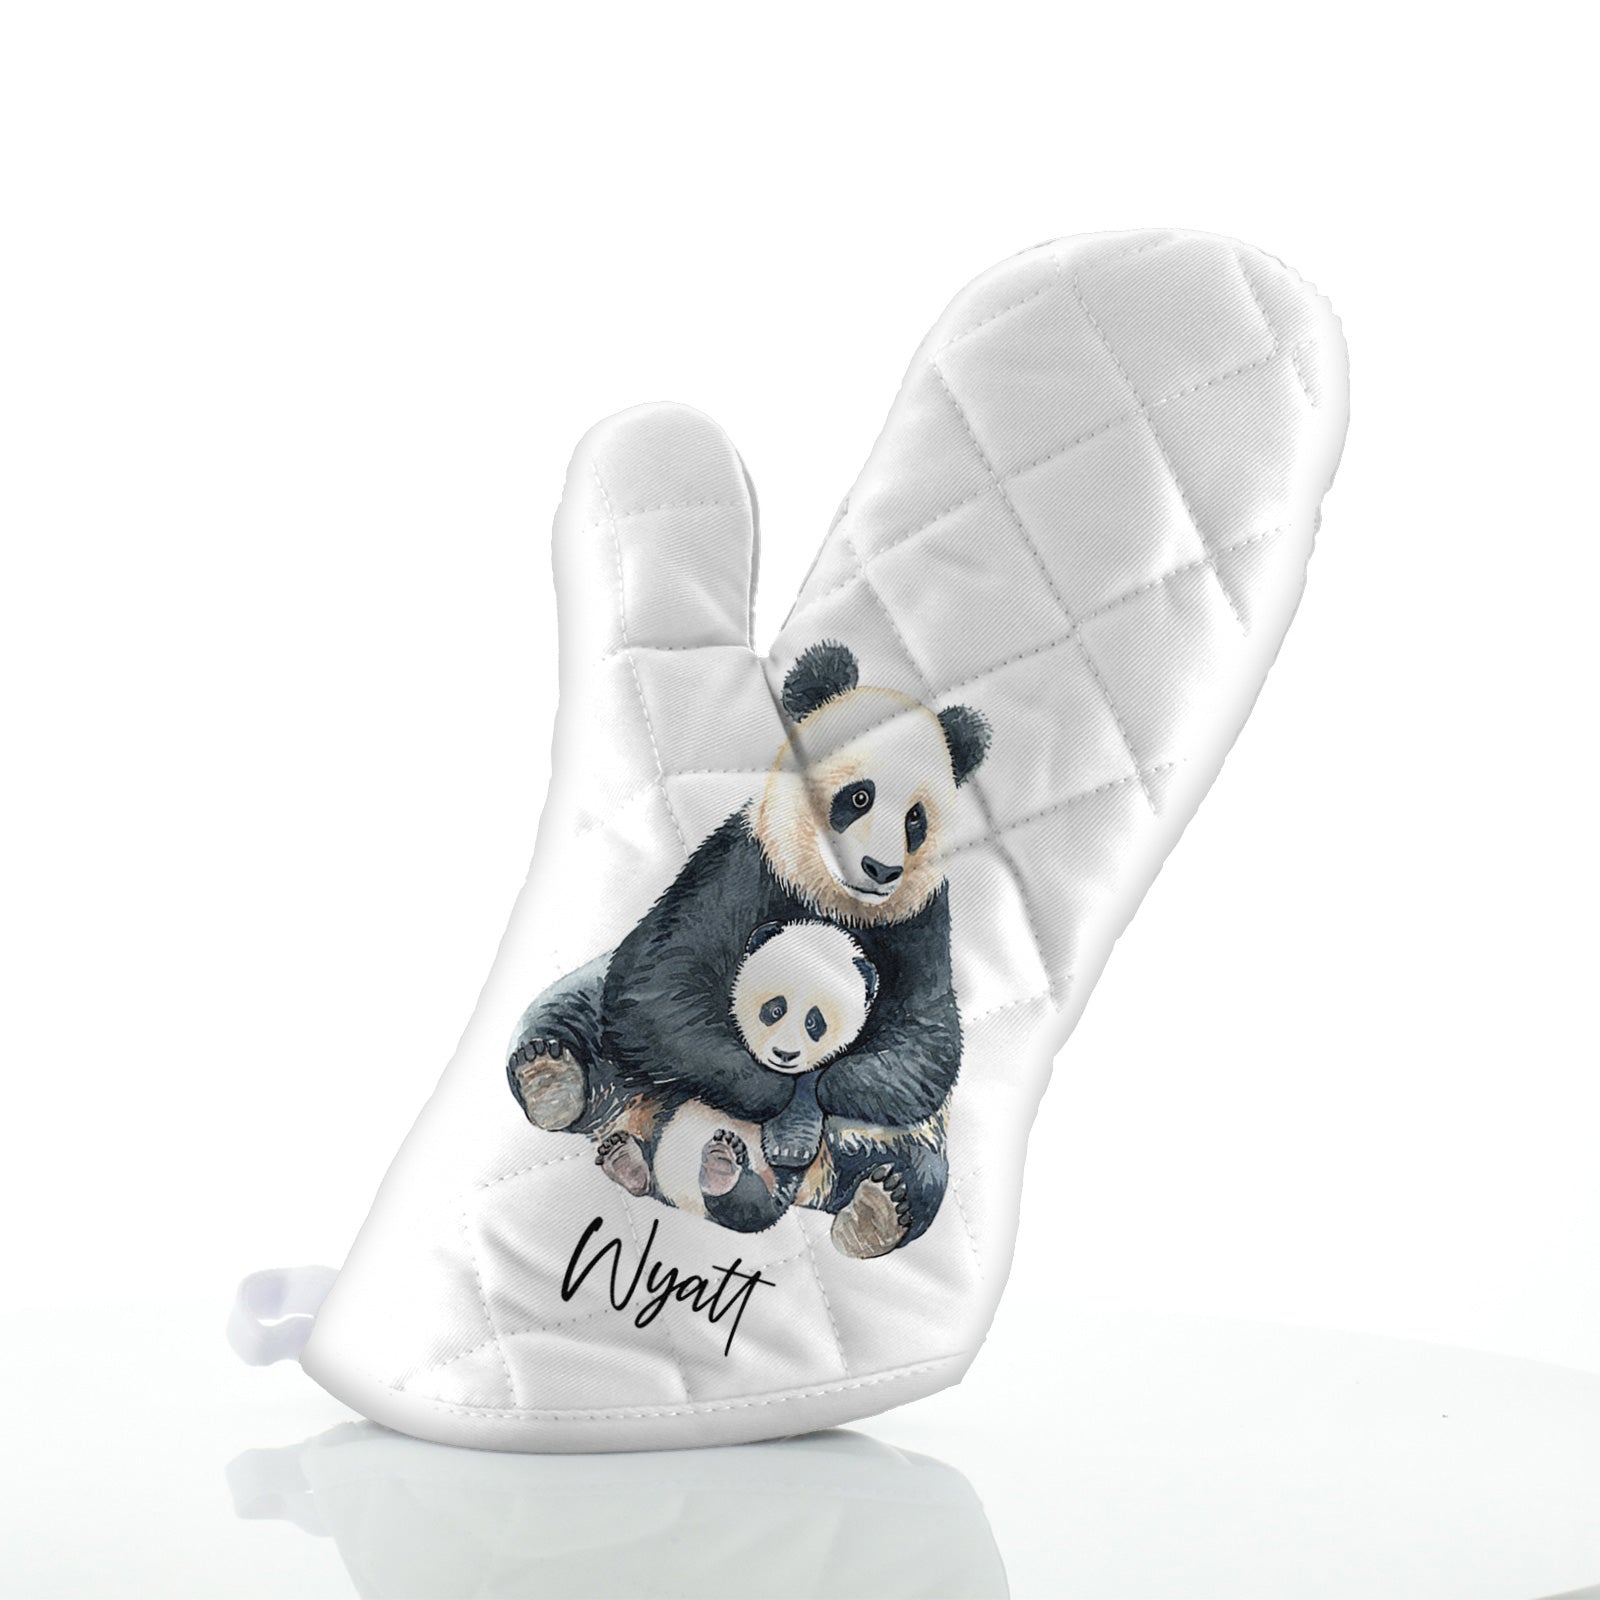 Personalised Oven Glove with Welcoming Text and Relaxing Mum and Baby Pandas